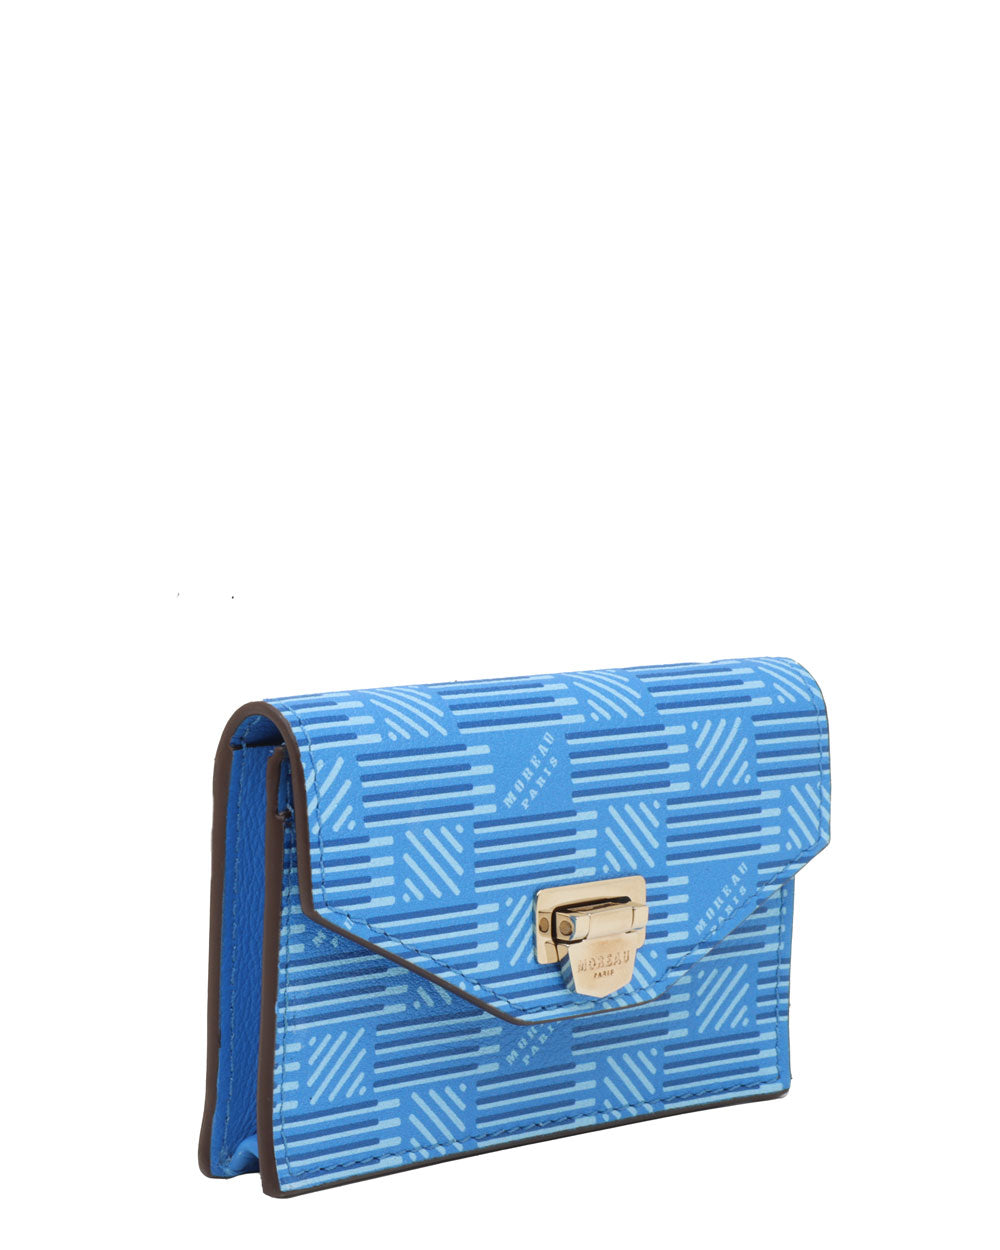 Wallets & purses Marni - Trifold wallet in teal blue and pink